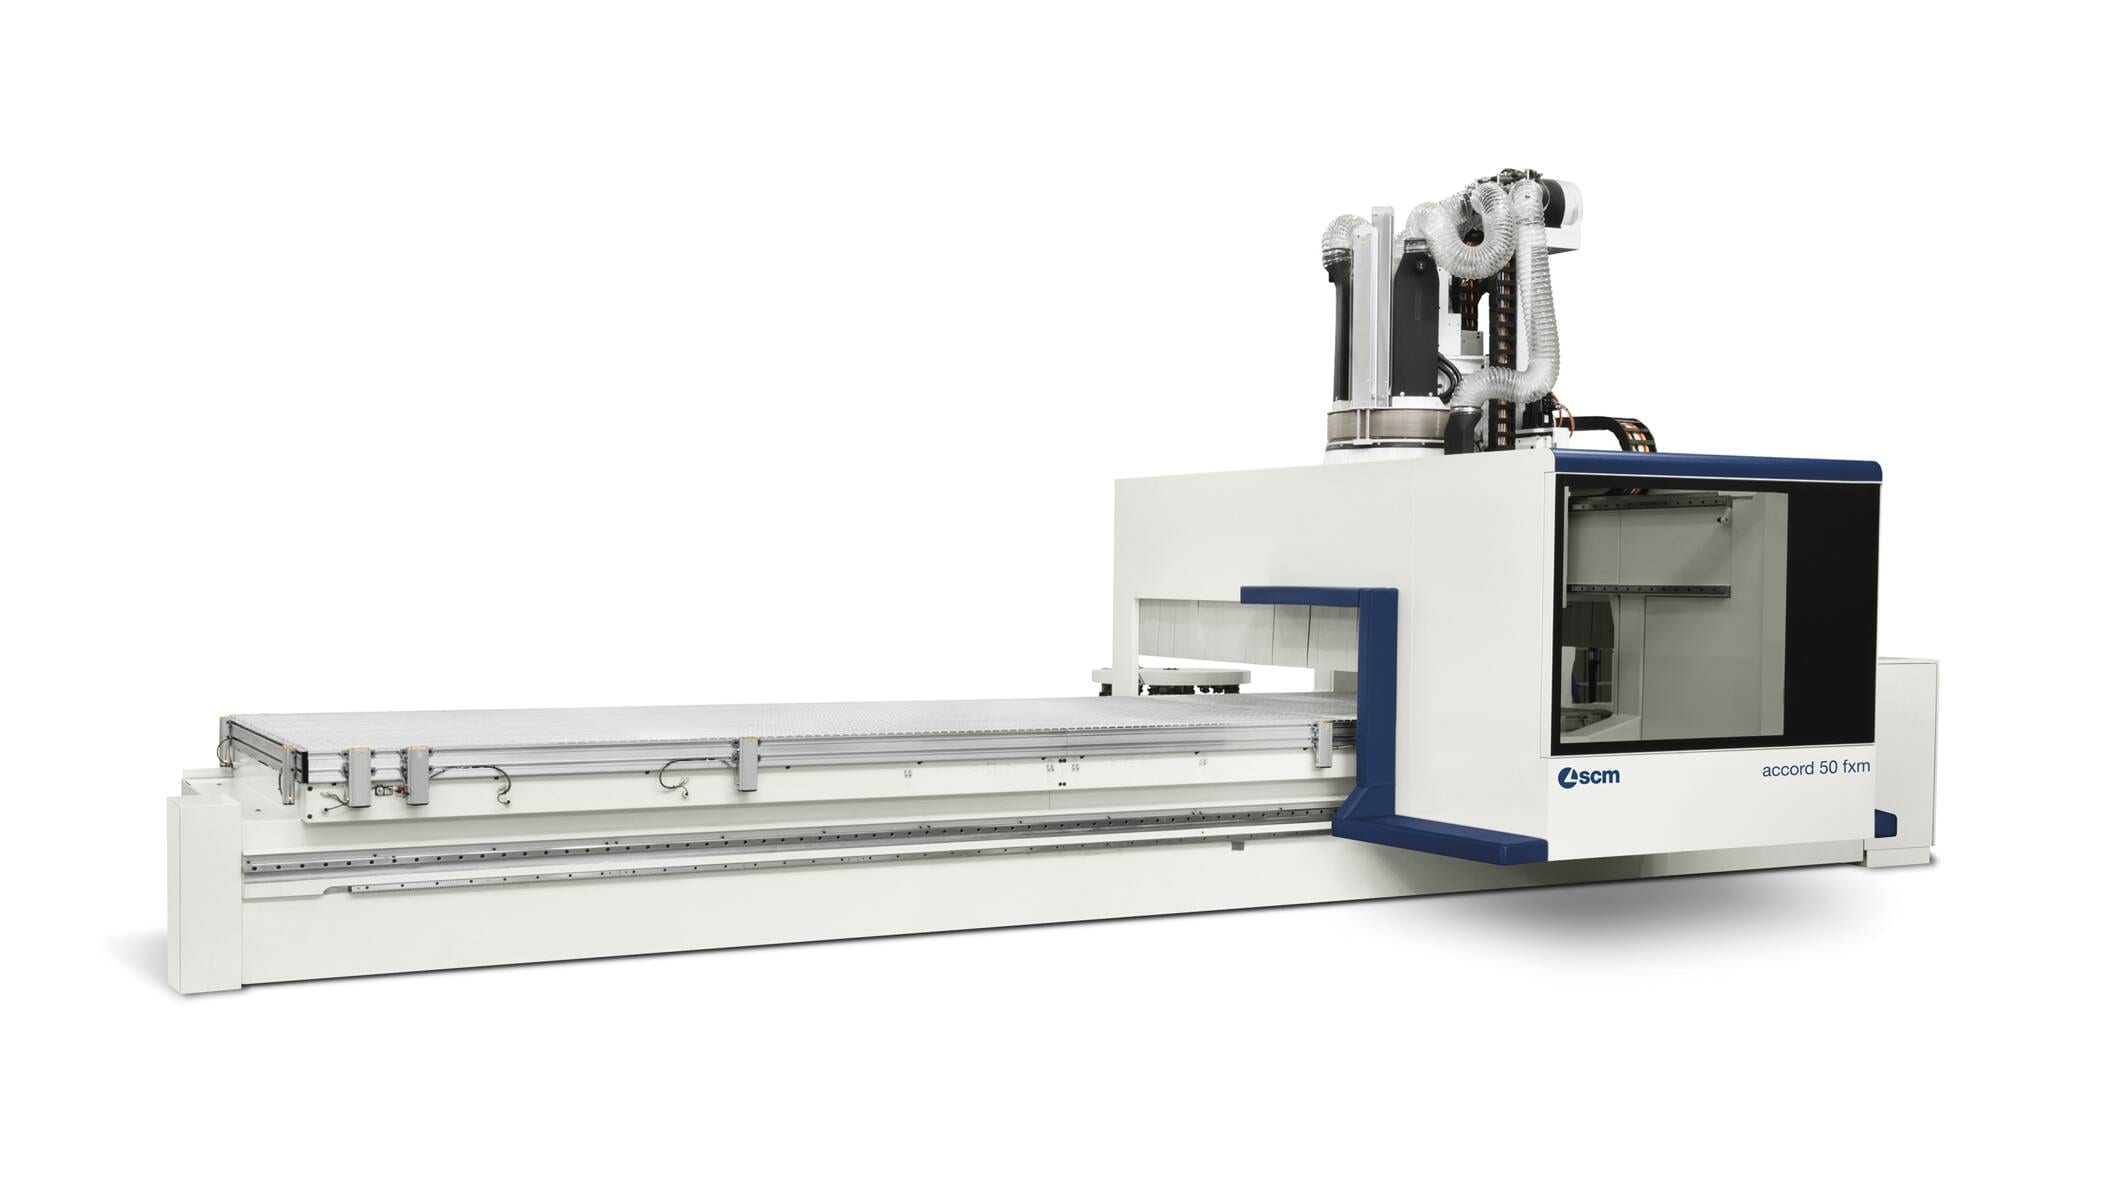 CNC Machining Centres - CNC Nesting Machining Centres for routing and drilling - accord 50 fxm